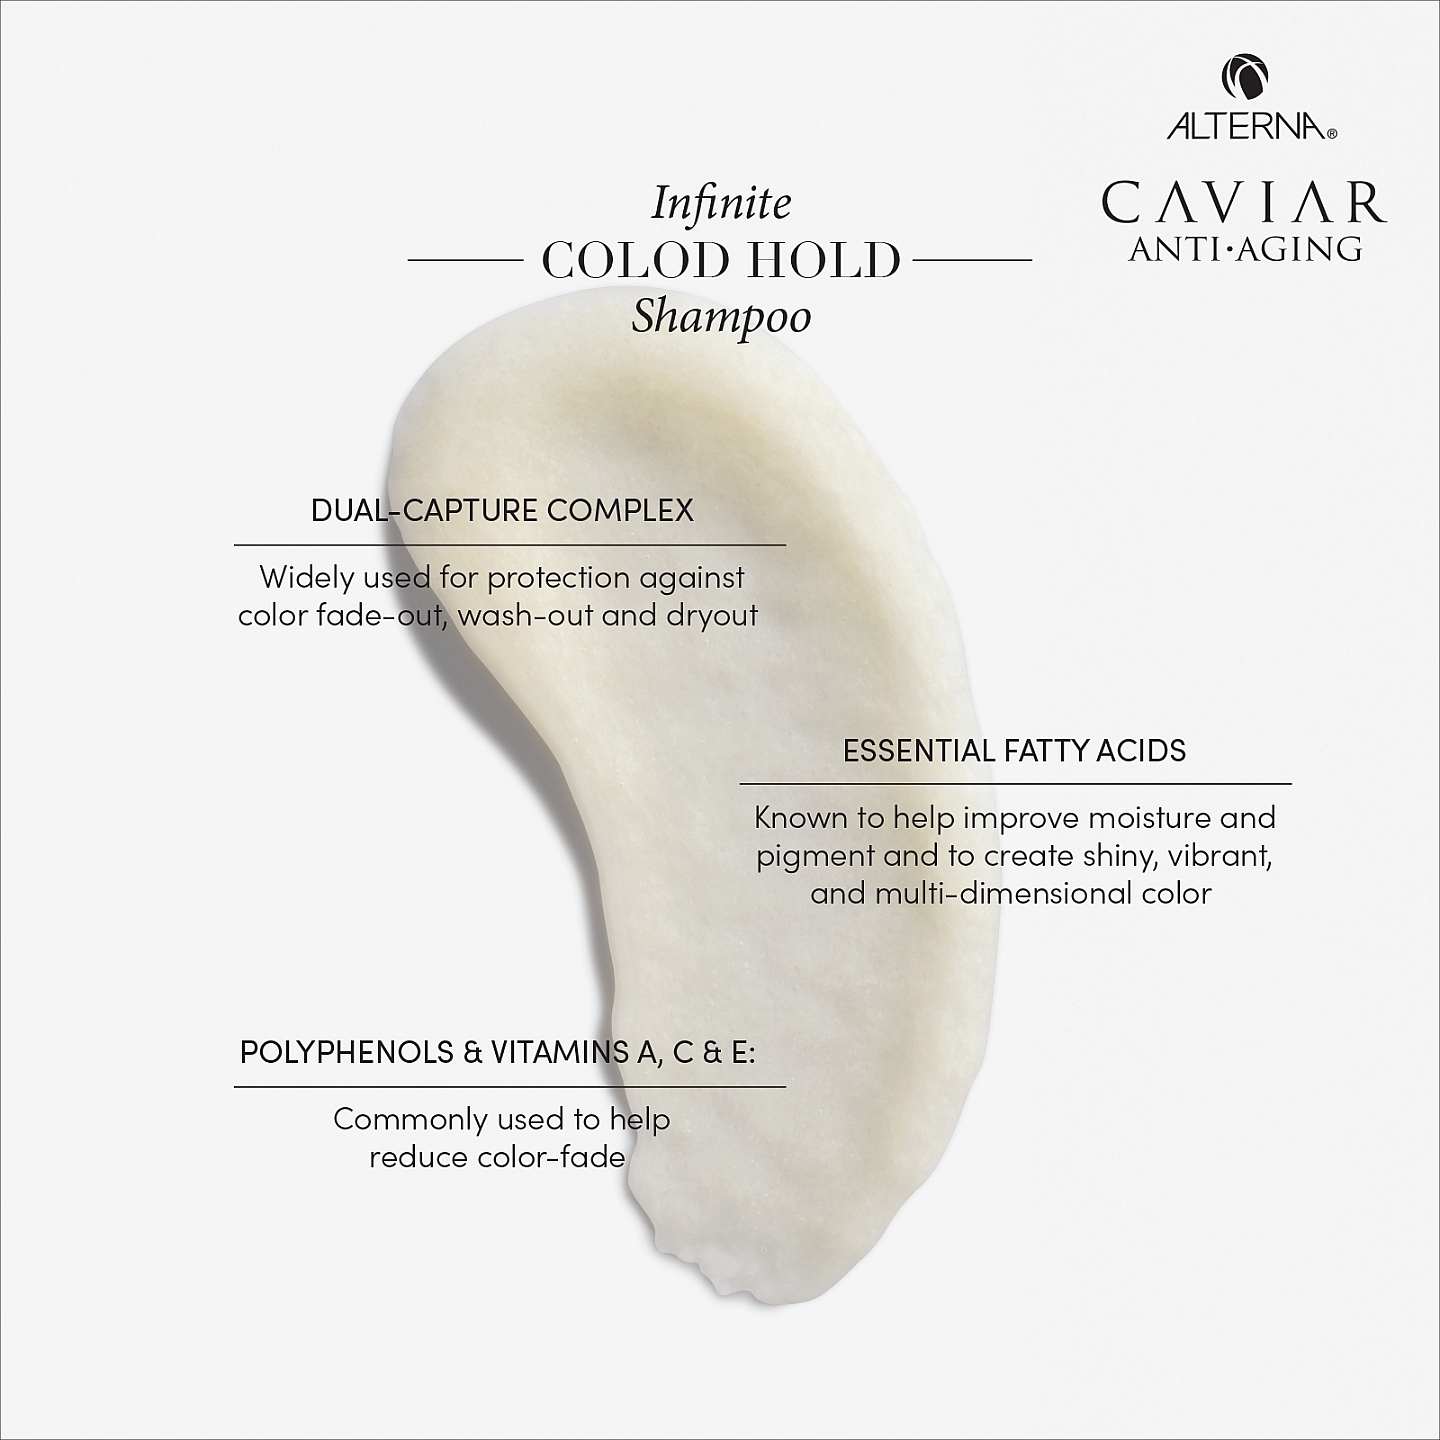 https://assets.alternahaircare.com/products/_1440x1440_crop_center-center_100_line/BSG_Alterna_1600x1600_Infinite-Color-Hold_GoopAsset_Caviar_ColorHold-Shampoo.jpg